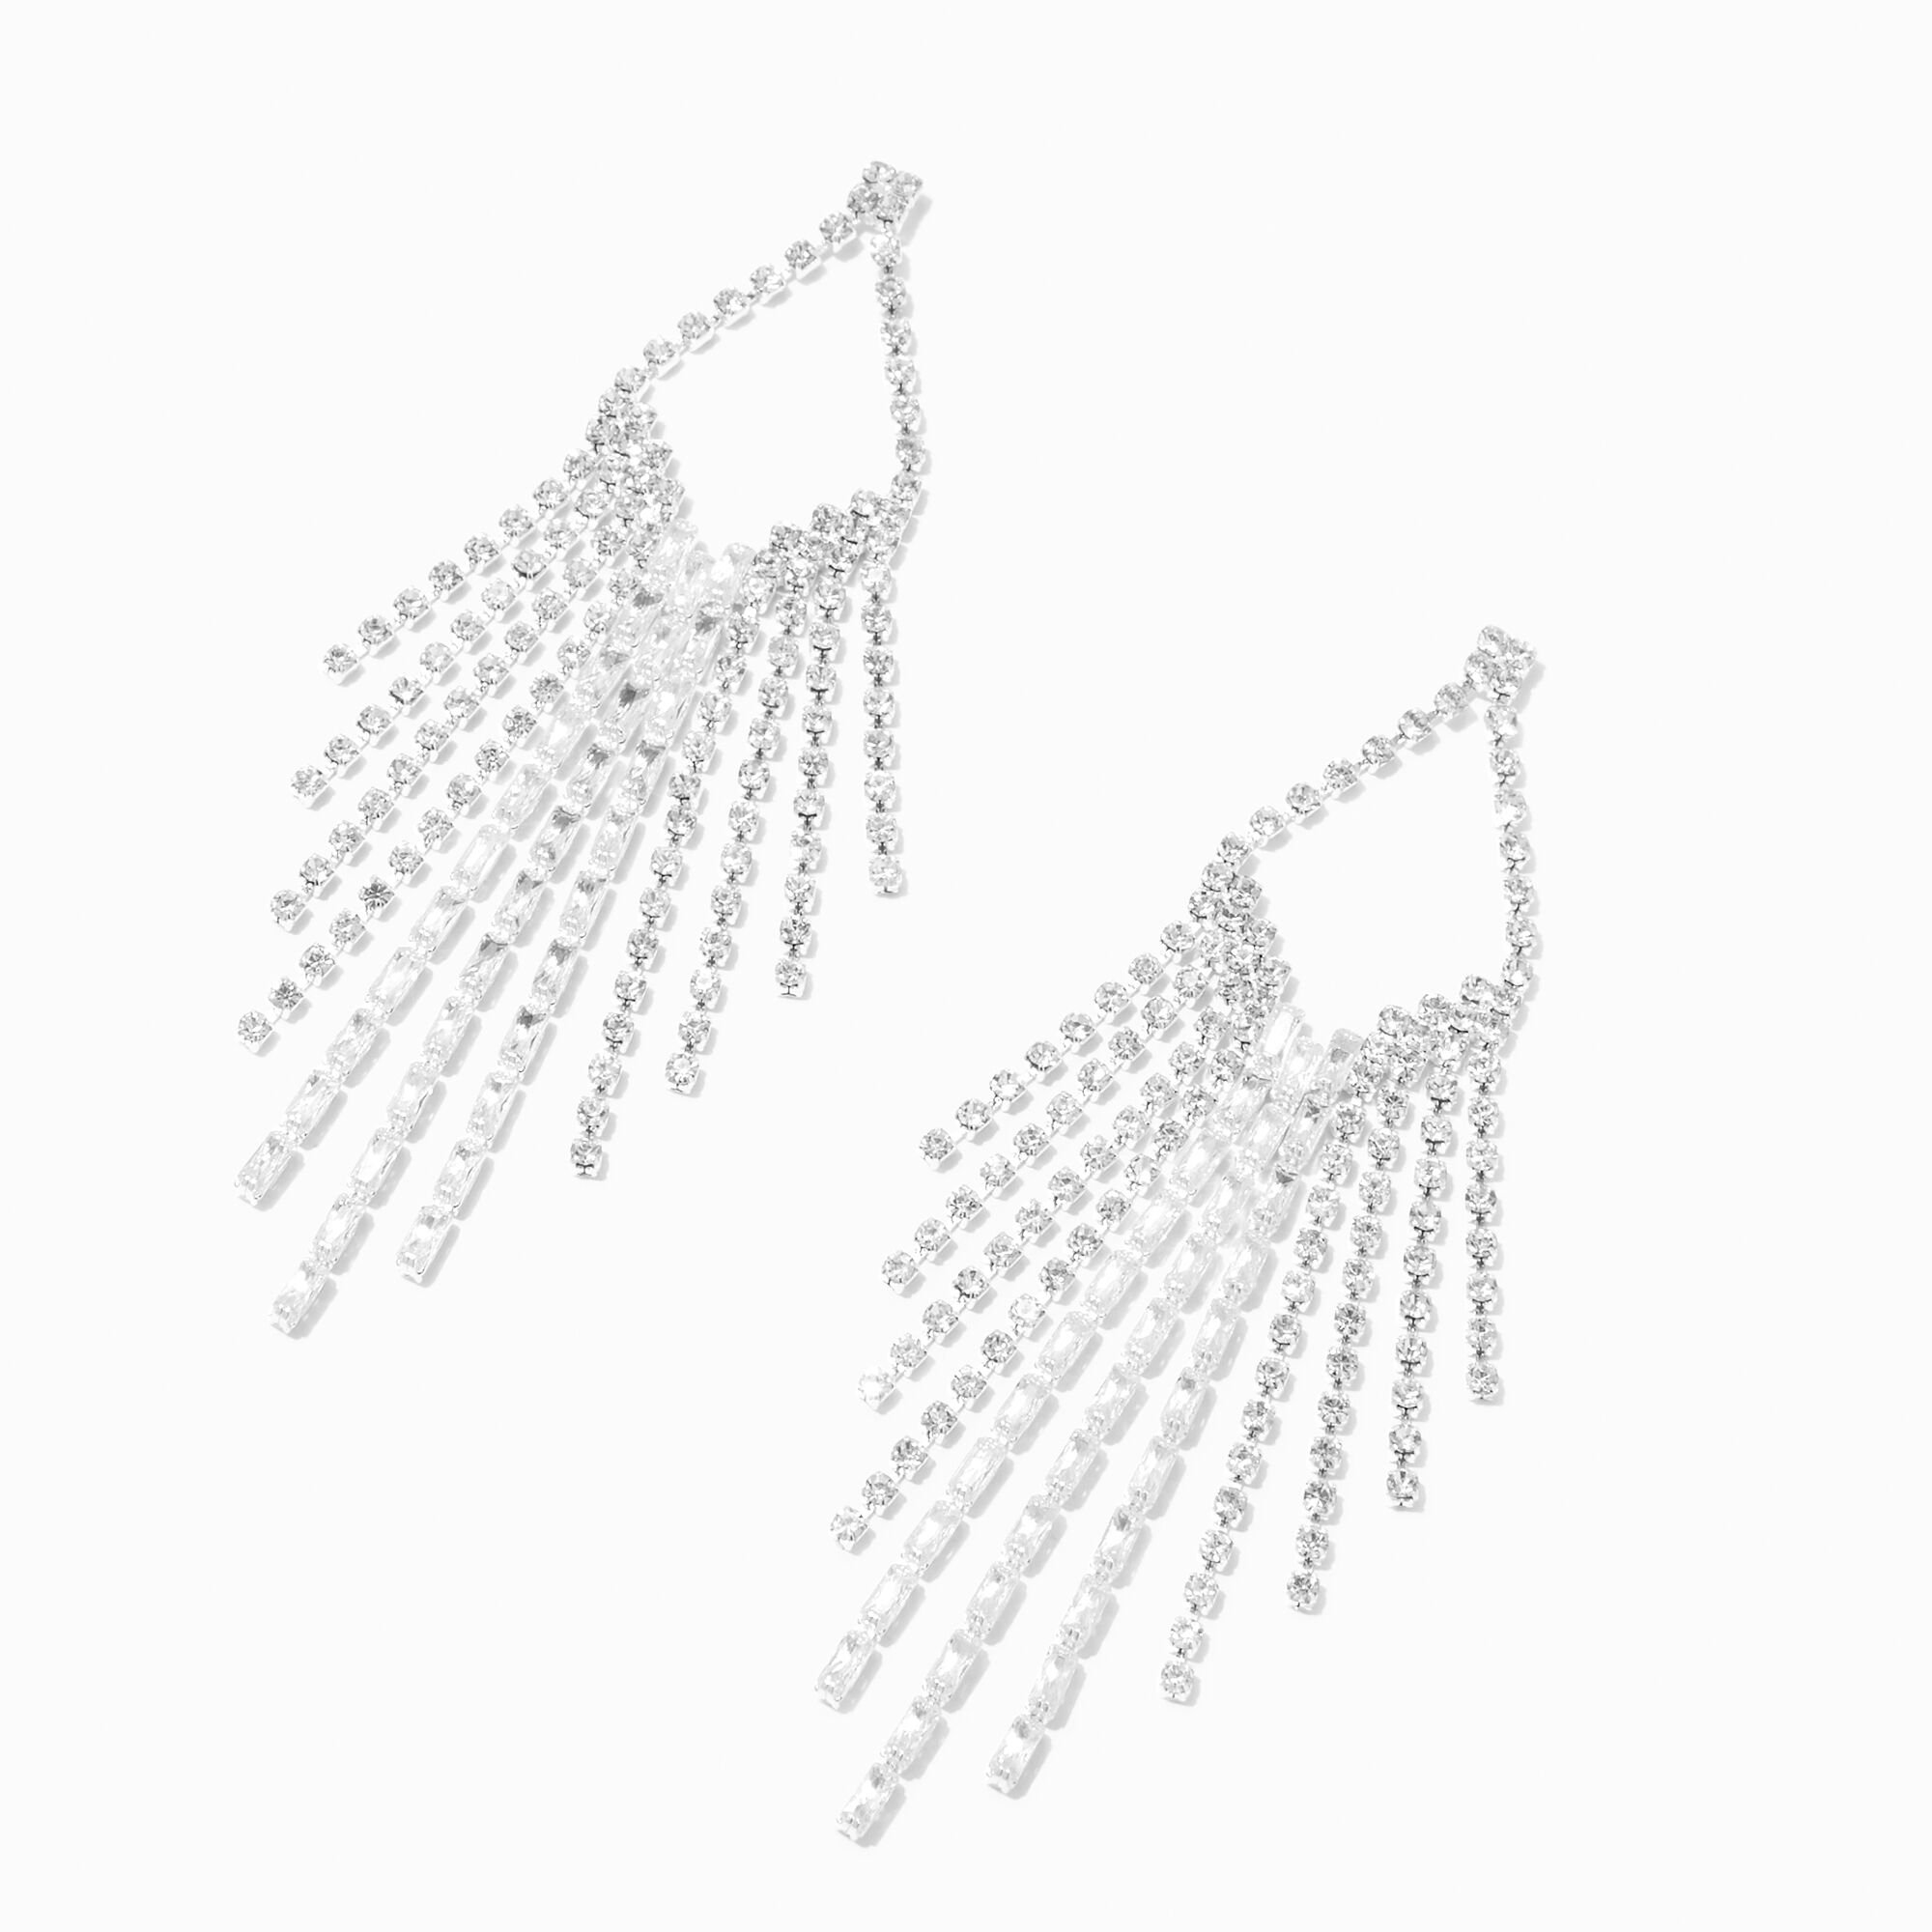 View Claires Tone Crystal Baguette Fringe 4 Drop Earrings Silver information